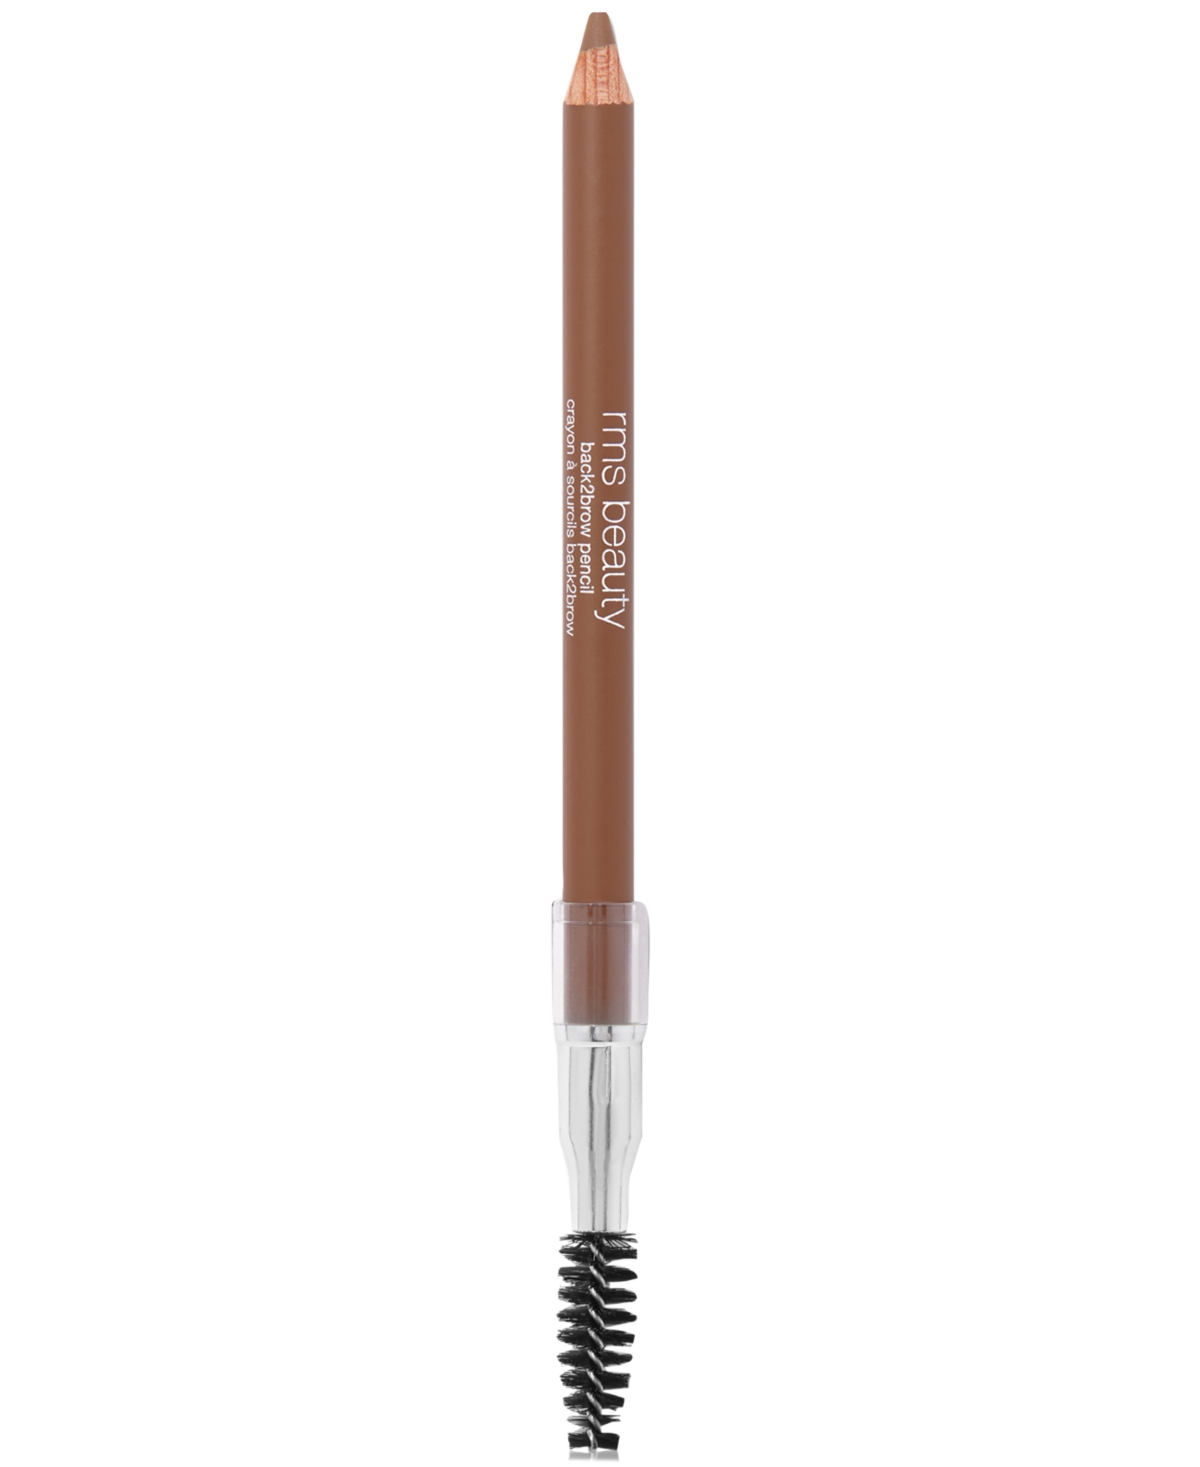 Rms Beauty Back2brow Pencil In Medium